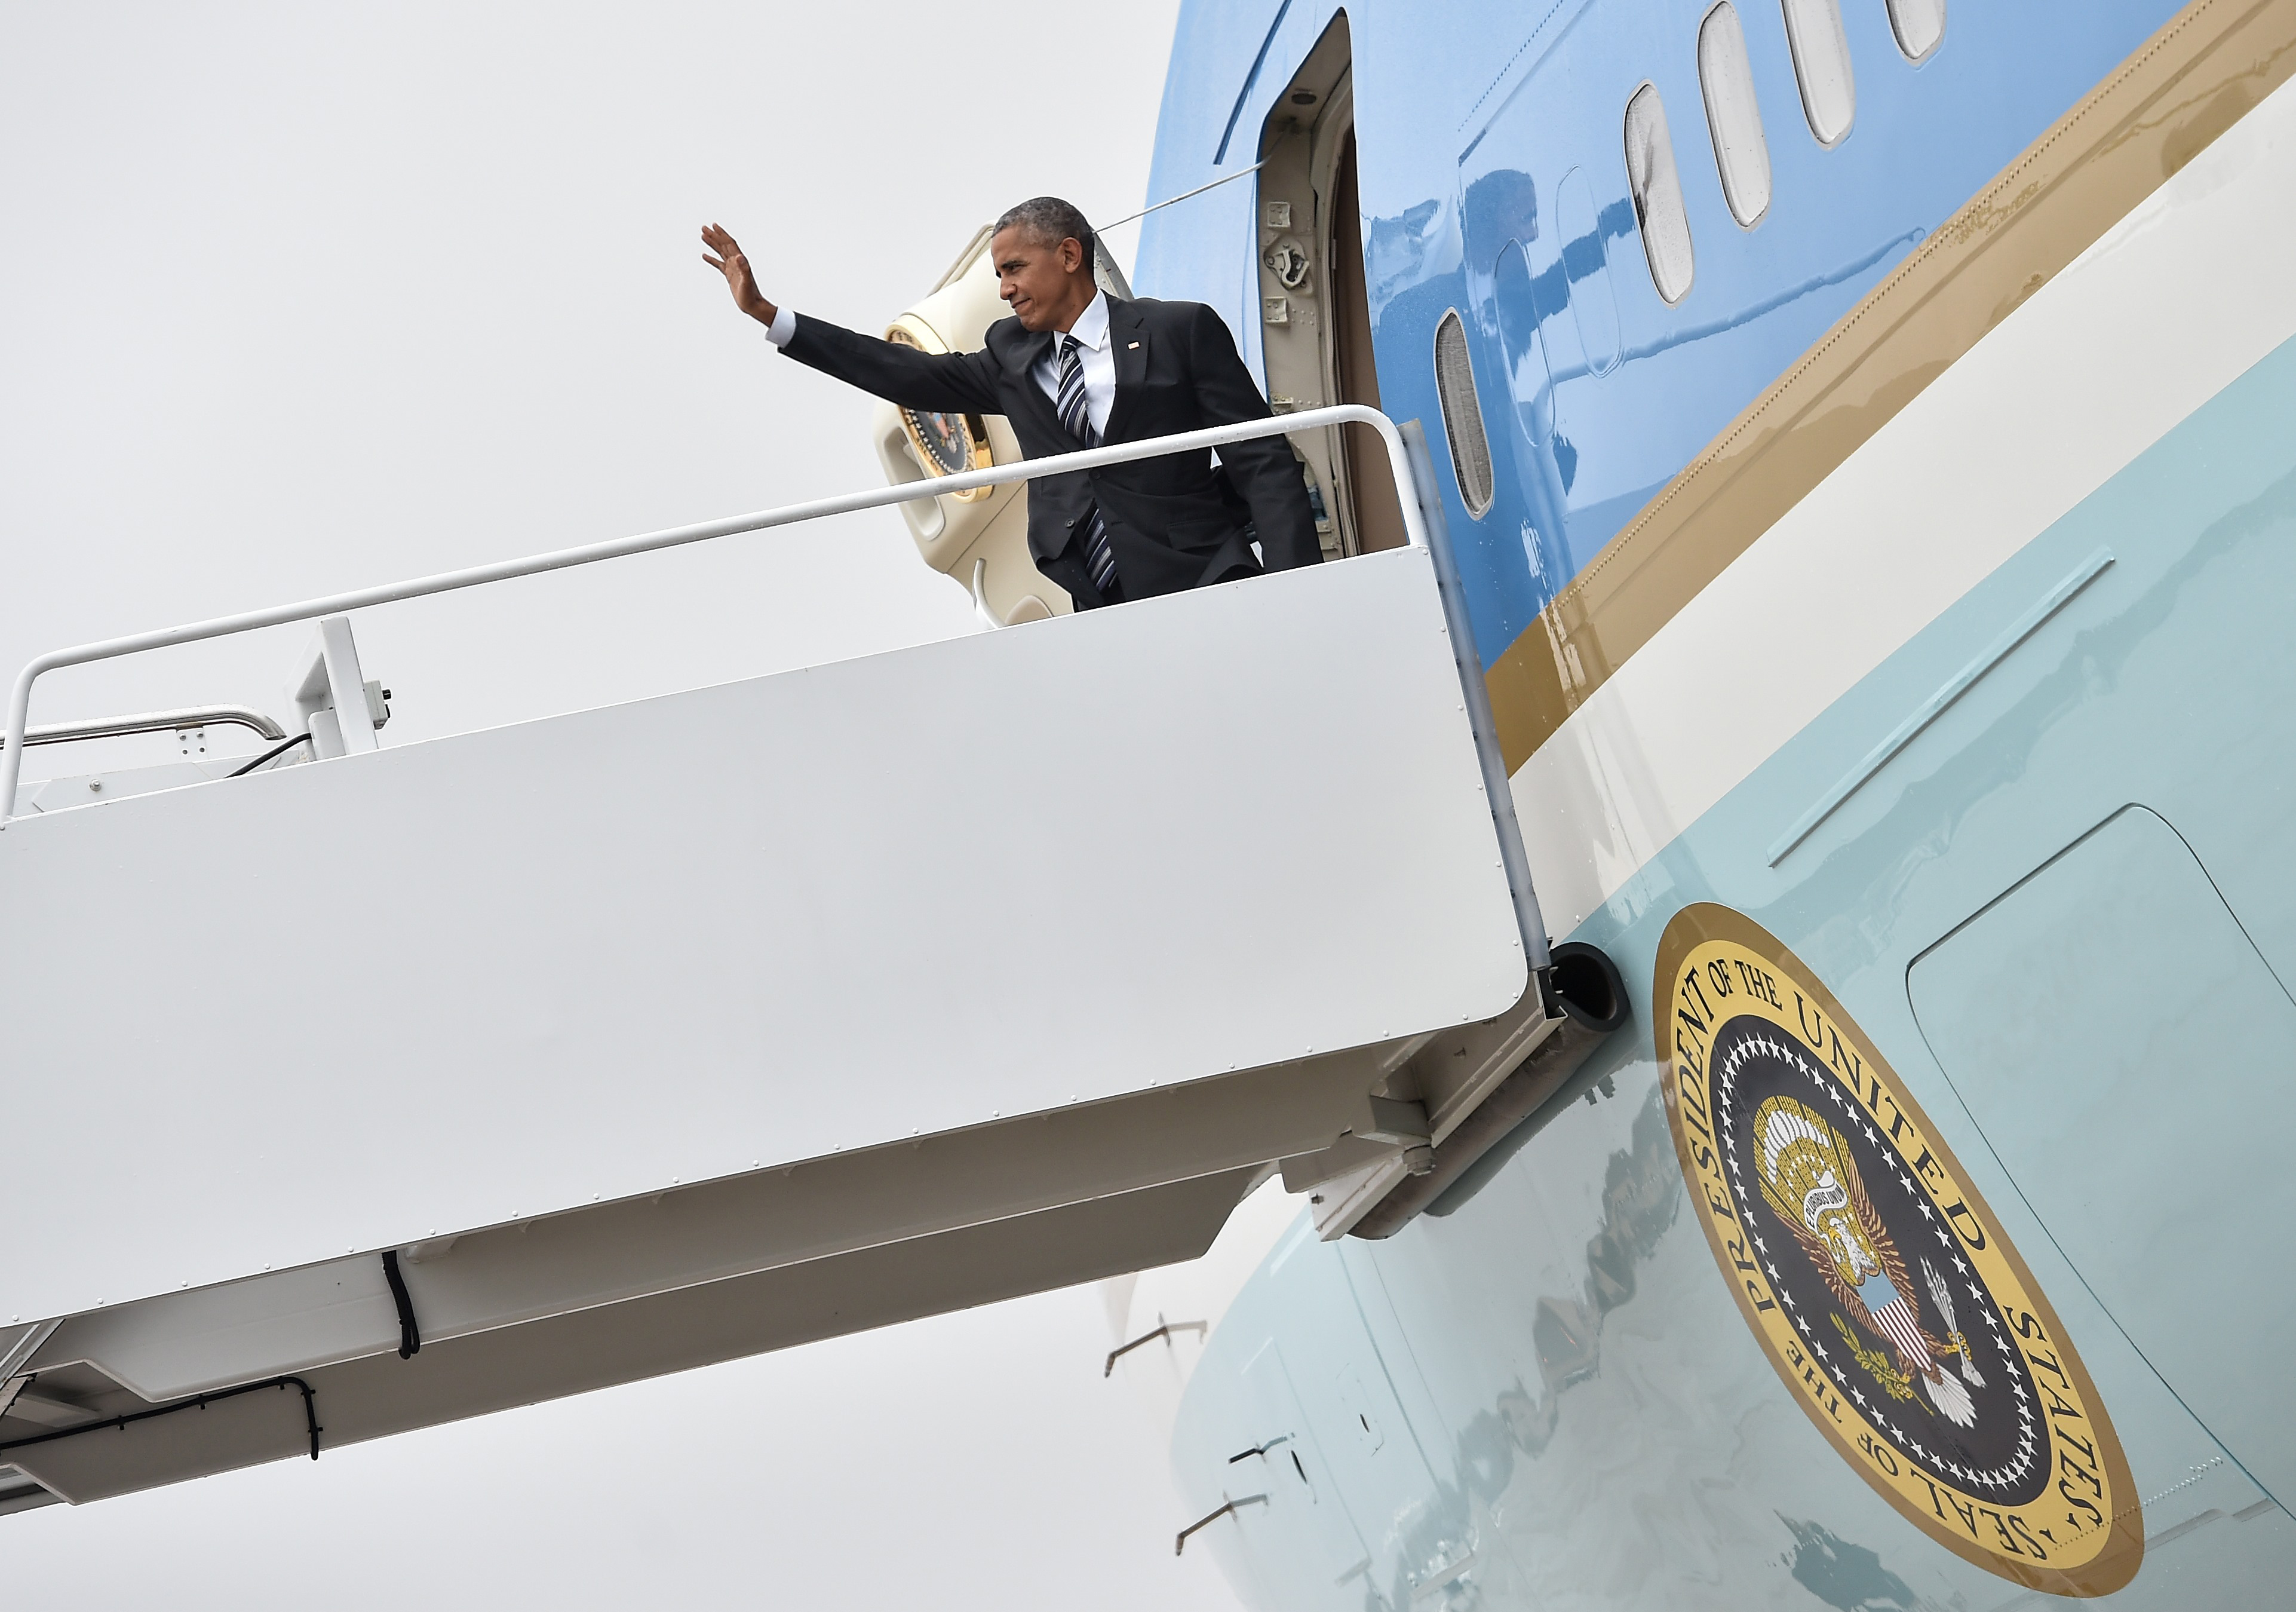 US President Barack Obama waves upon boarding Air Force One at Andrews Air Force Base in Maryland on September 29, 2016 as he departs to attend the funeral of former Israeli president Shimon Peres in Jerusalem. World leaders from Obama to Prince Charles are expected in Israel to attend the funeral of Peres.  / AFP PHOTO / NICHOLAS KAMM